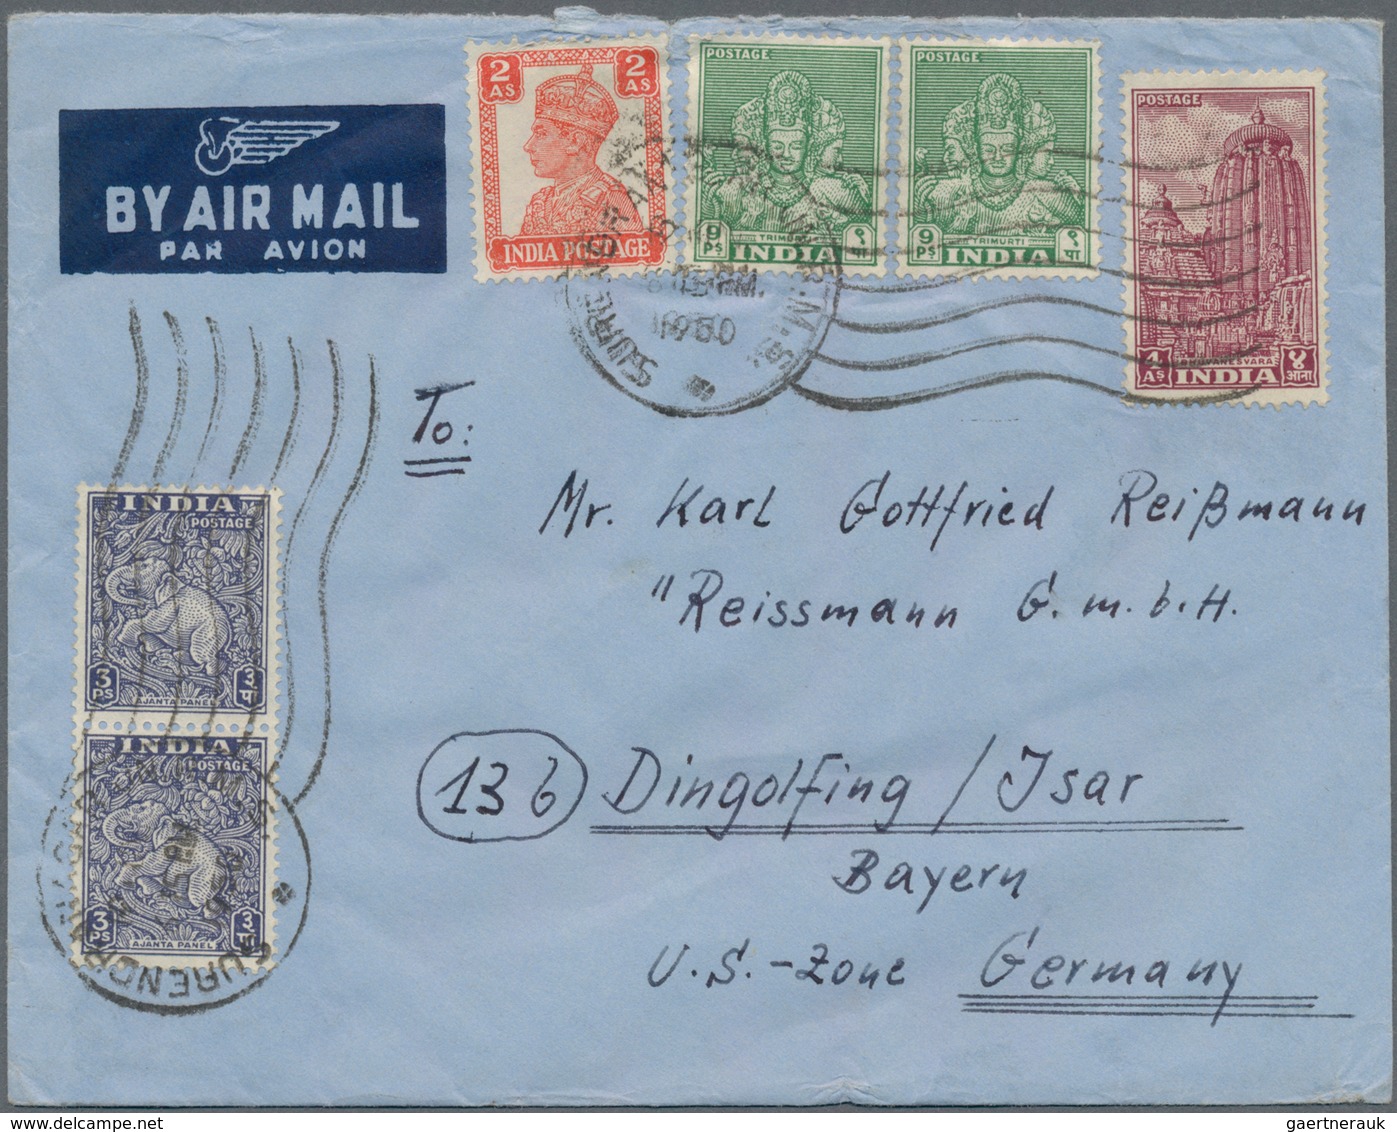 Asien: 1920/2000 (ca.), assortment of nearly 150 covers/cards with many interesting and attractive f